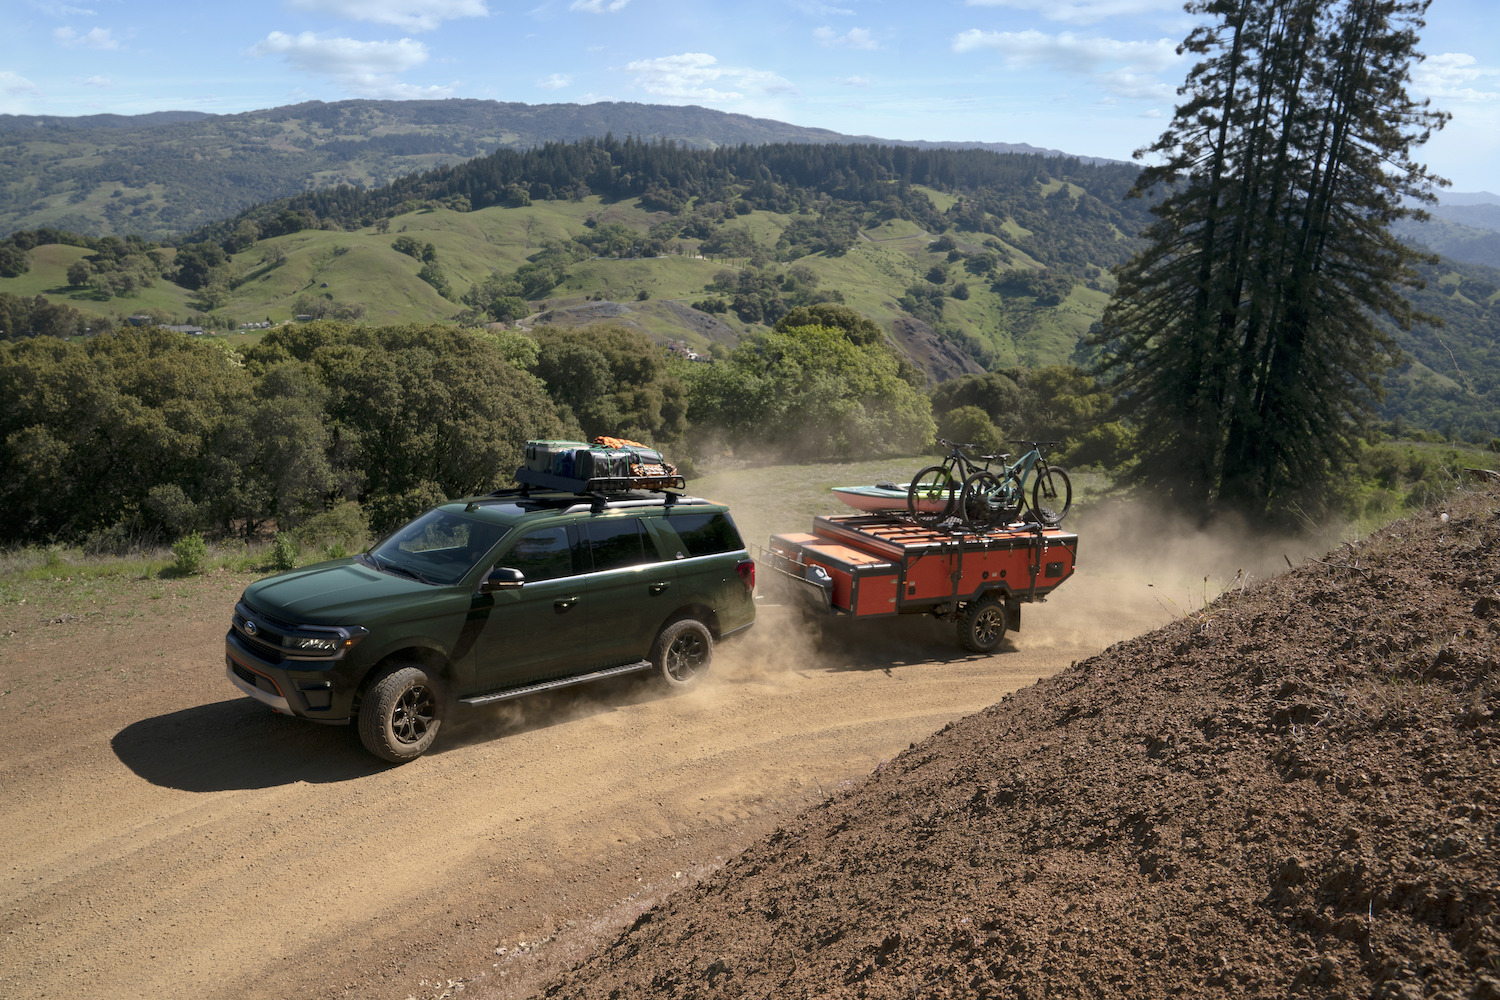 Green Ford Expedition Timberline edition full-size hybrid SUV towing a camping trailer up a dirt road, a mountain pass visible in the background.